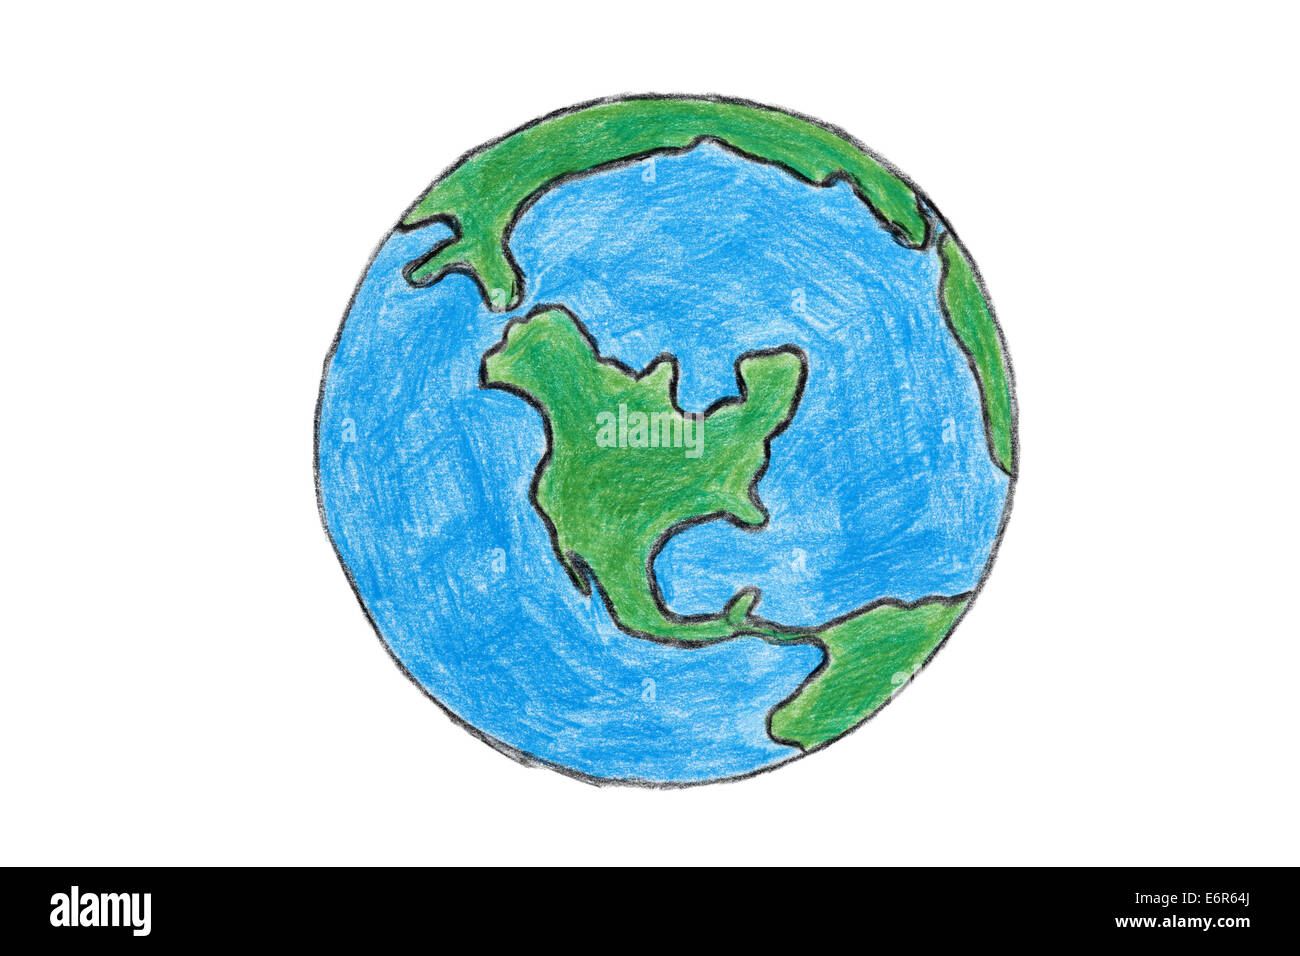 Earth hand-drawn with colored pencils. Isolated On White.  Image was hand drawn by myself. Stock Photo